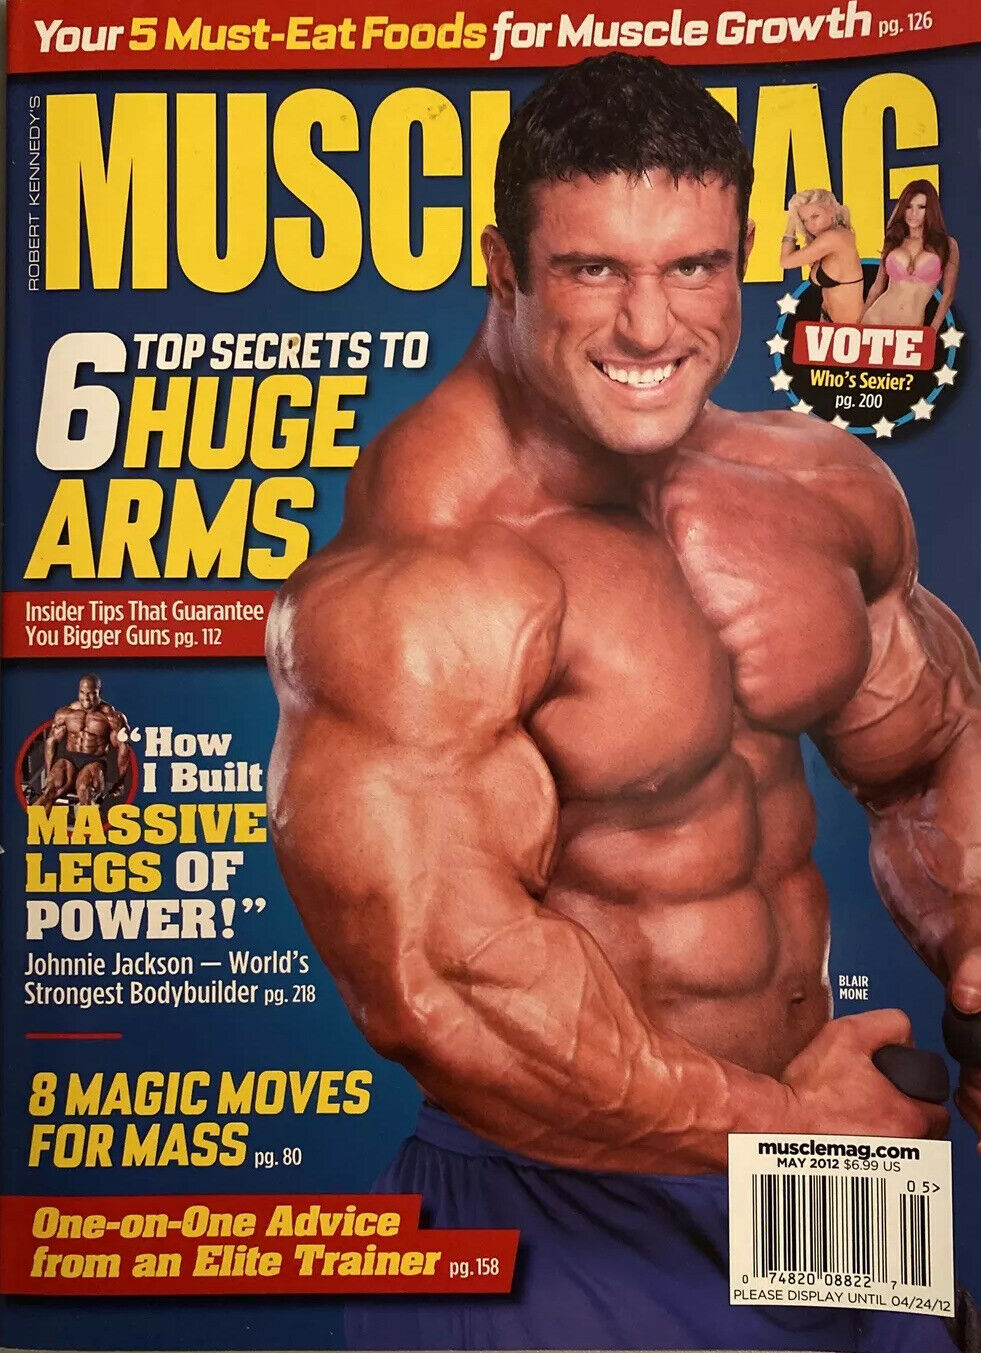 Muscle Mag May 2012 magazine back issue Muscle Mag magizine back copy Muscle Mag May 2012 Bodybuilding and Fitness Magazine Back Issue Published by Canadian Robert Kennedy and Founded in 1974. Your 5 Must - Eat Foods For Muscle Growth.